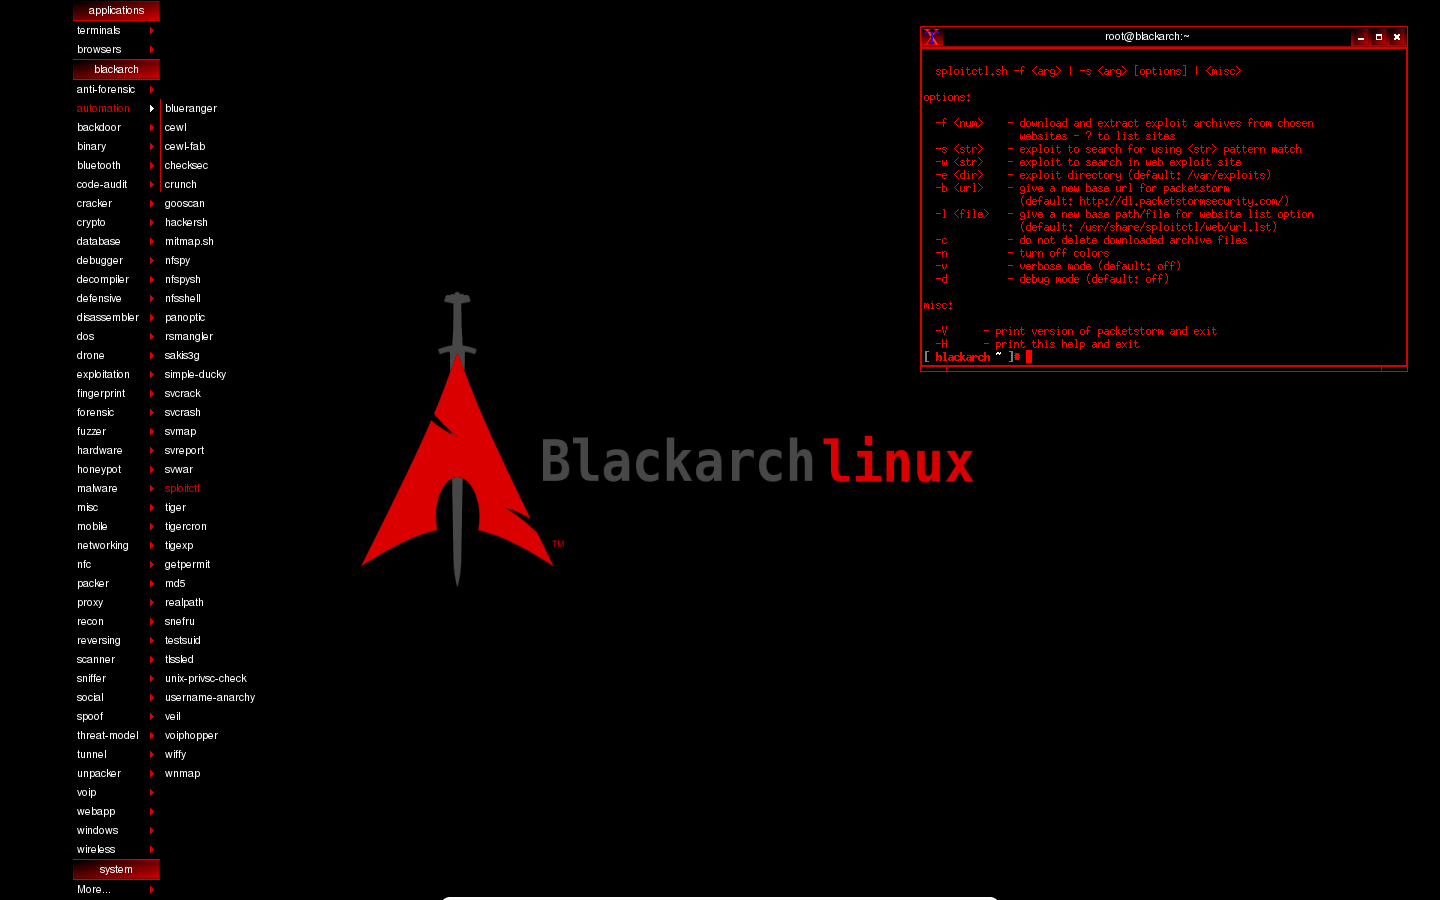 BlackArch Linux ISO available